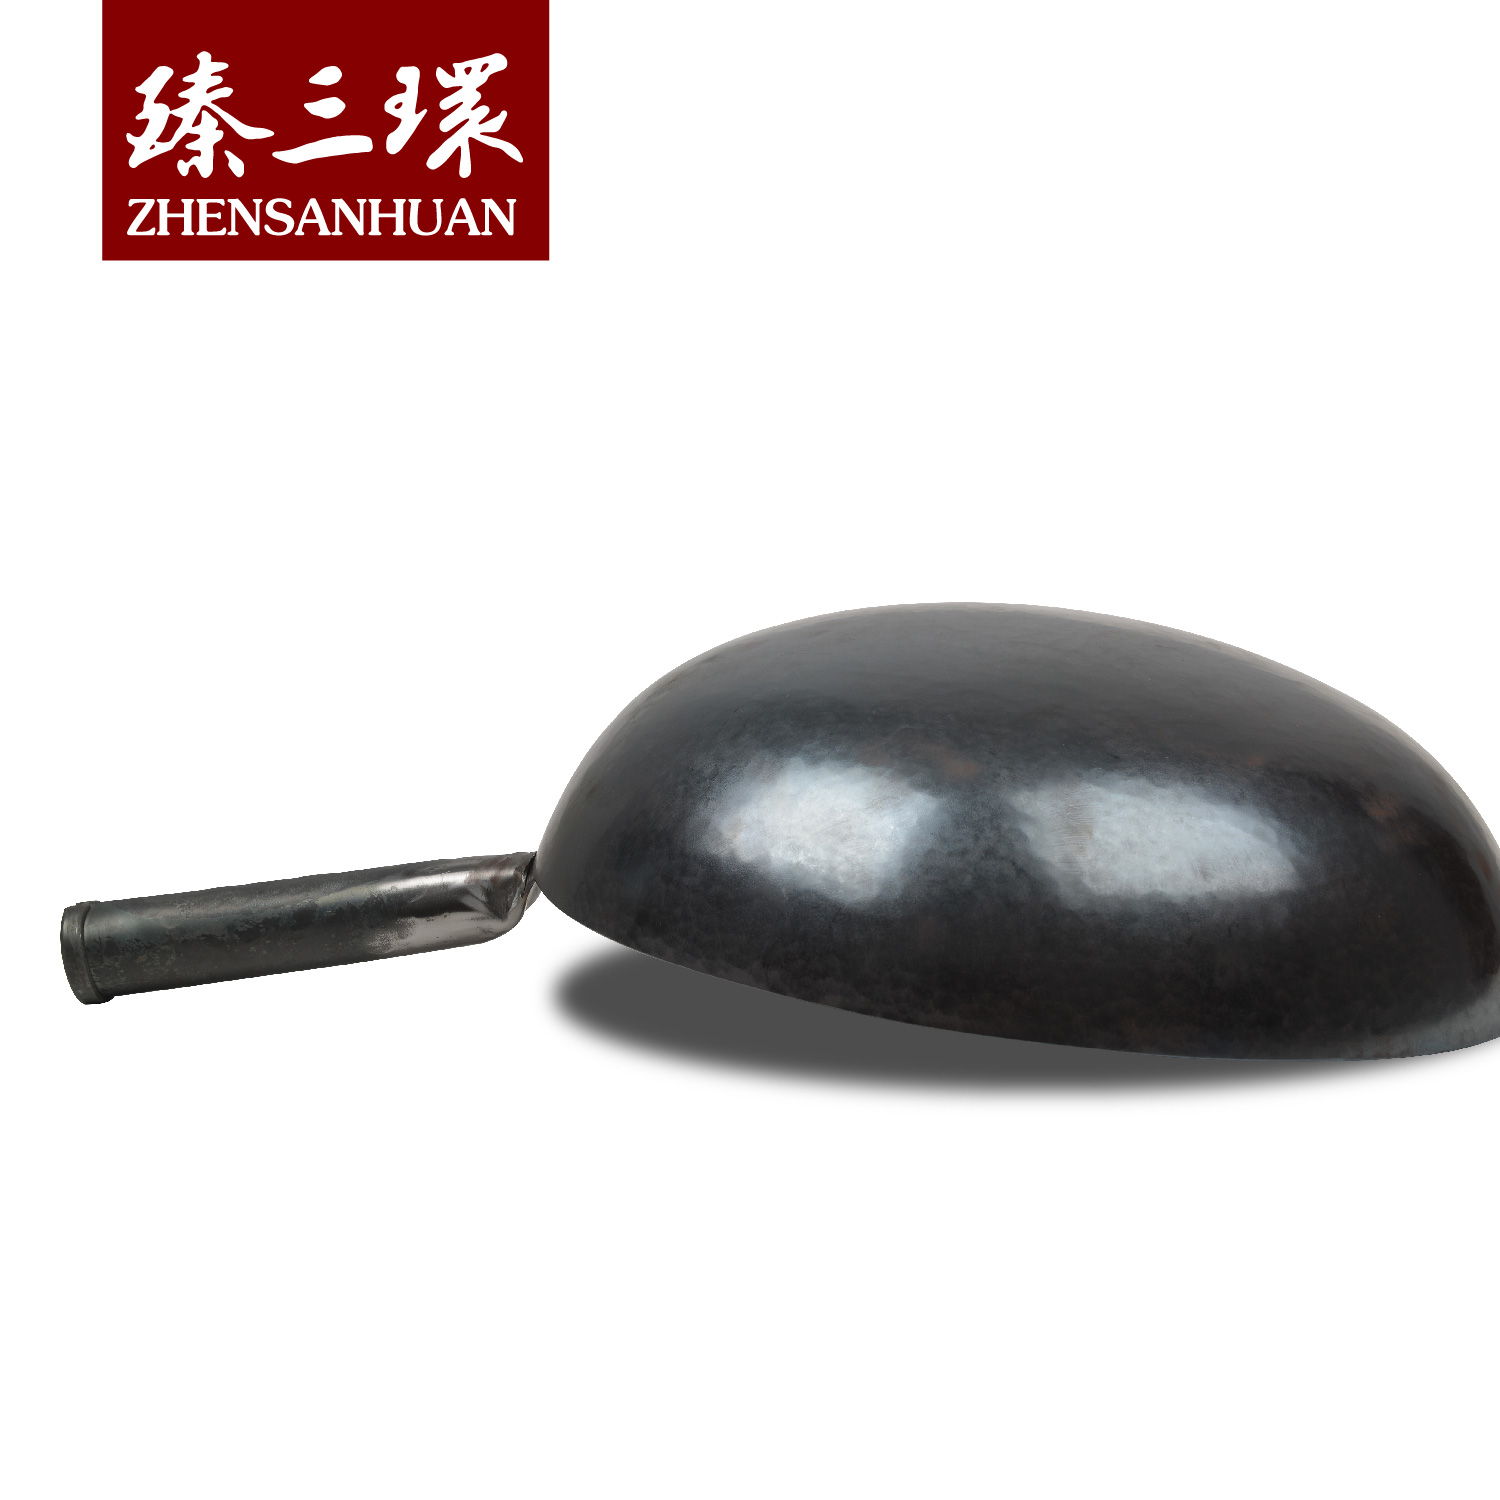 12.6 inch Traditional High Quality Hand Forged Hammered Iron Pow Wok